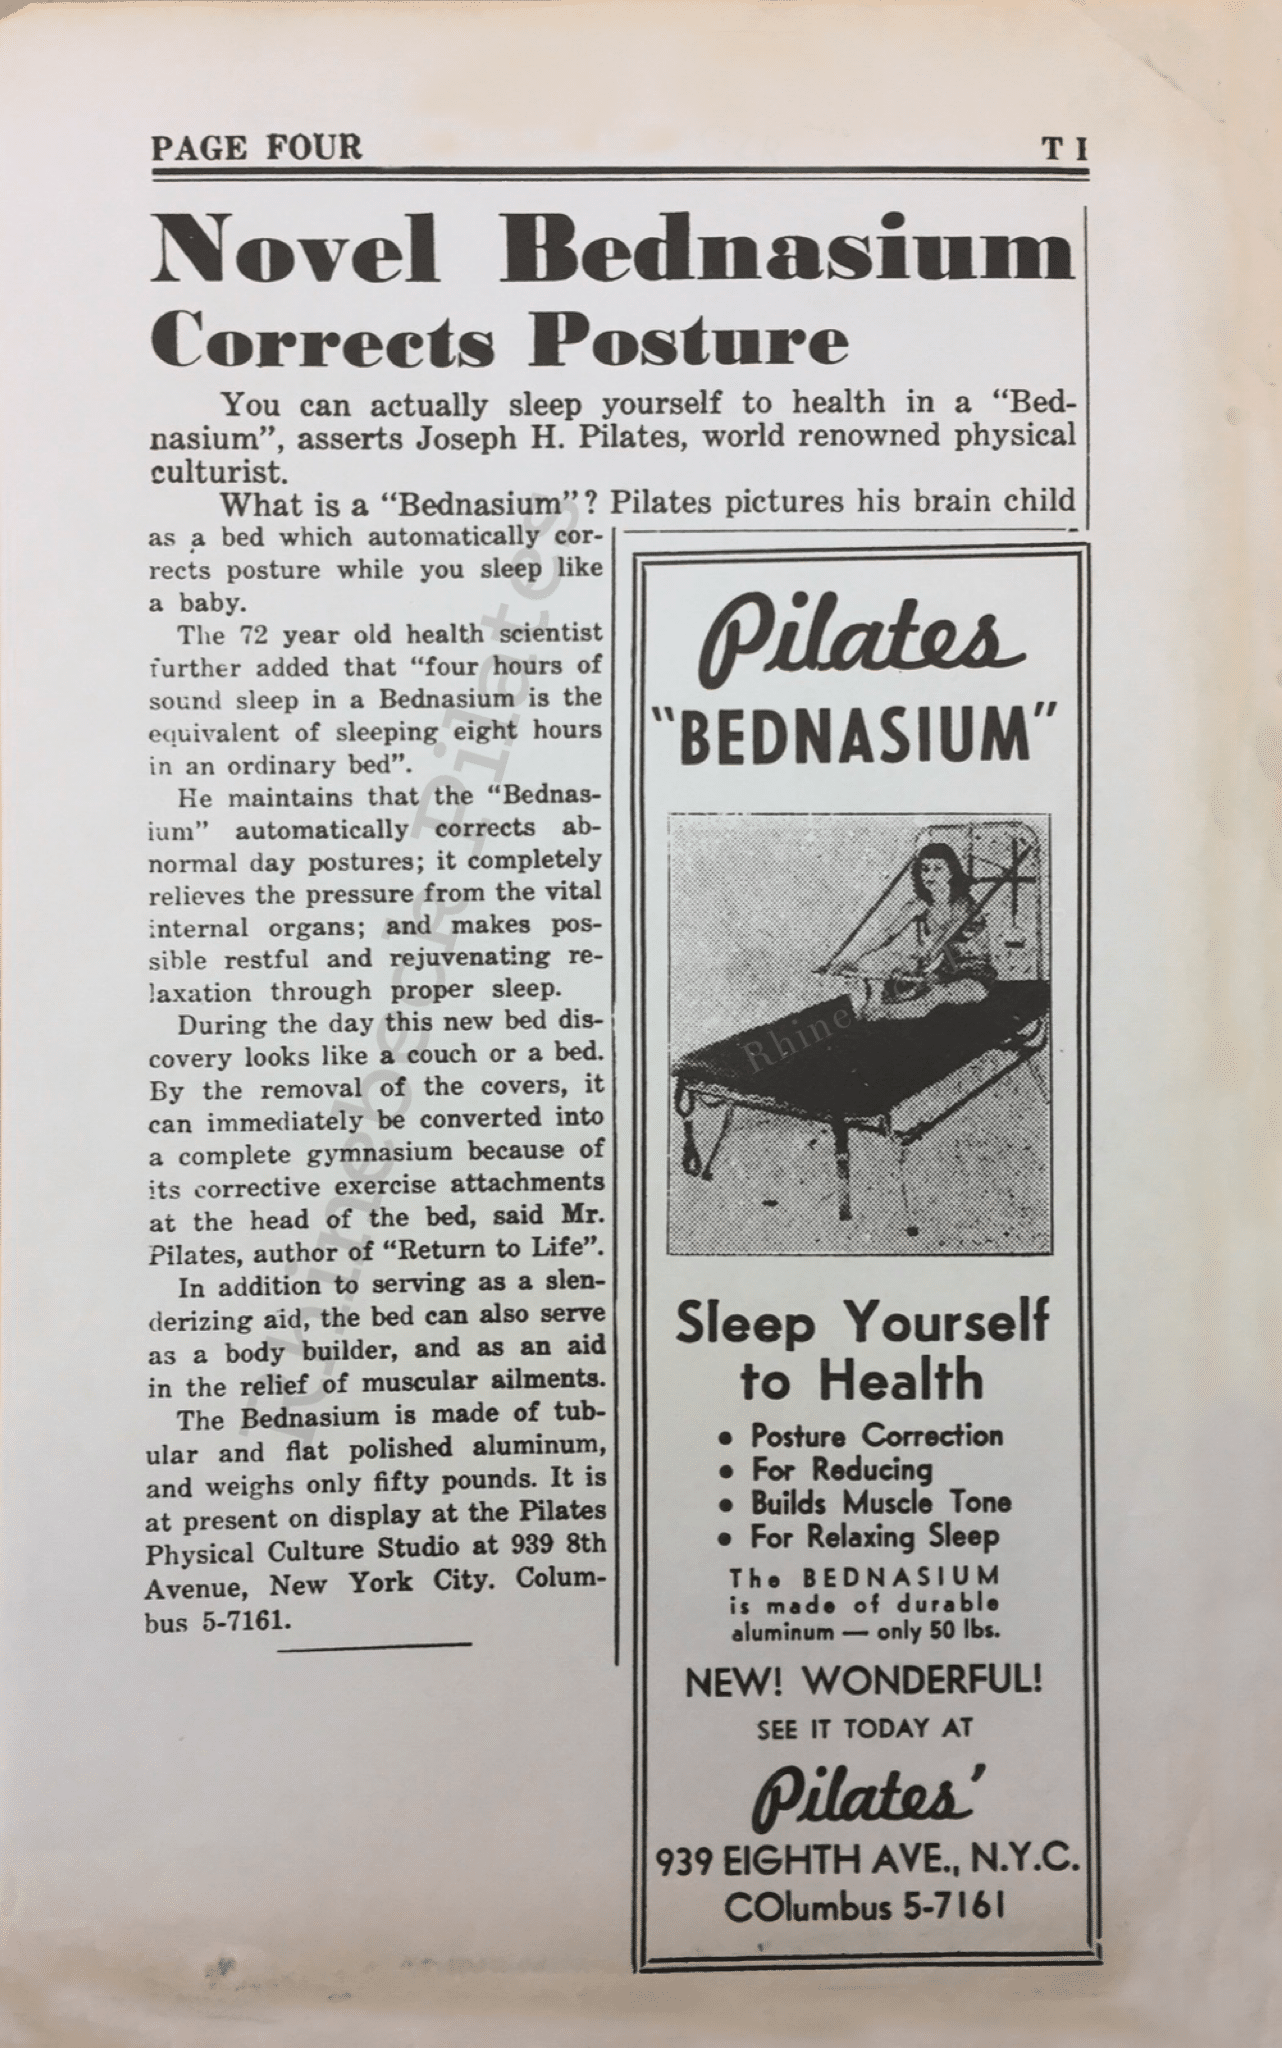 "Boosts V-shaped Bed as Better for Rest" Pilates History Archive Article